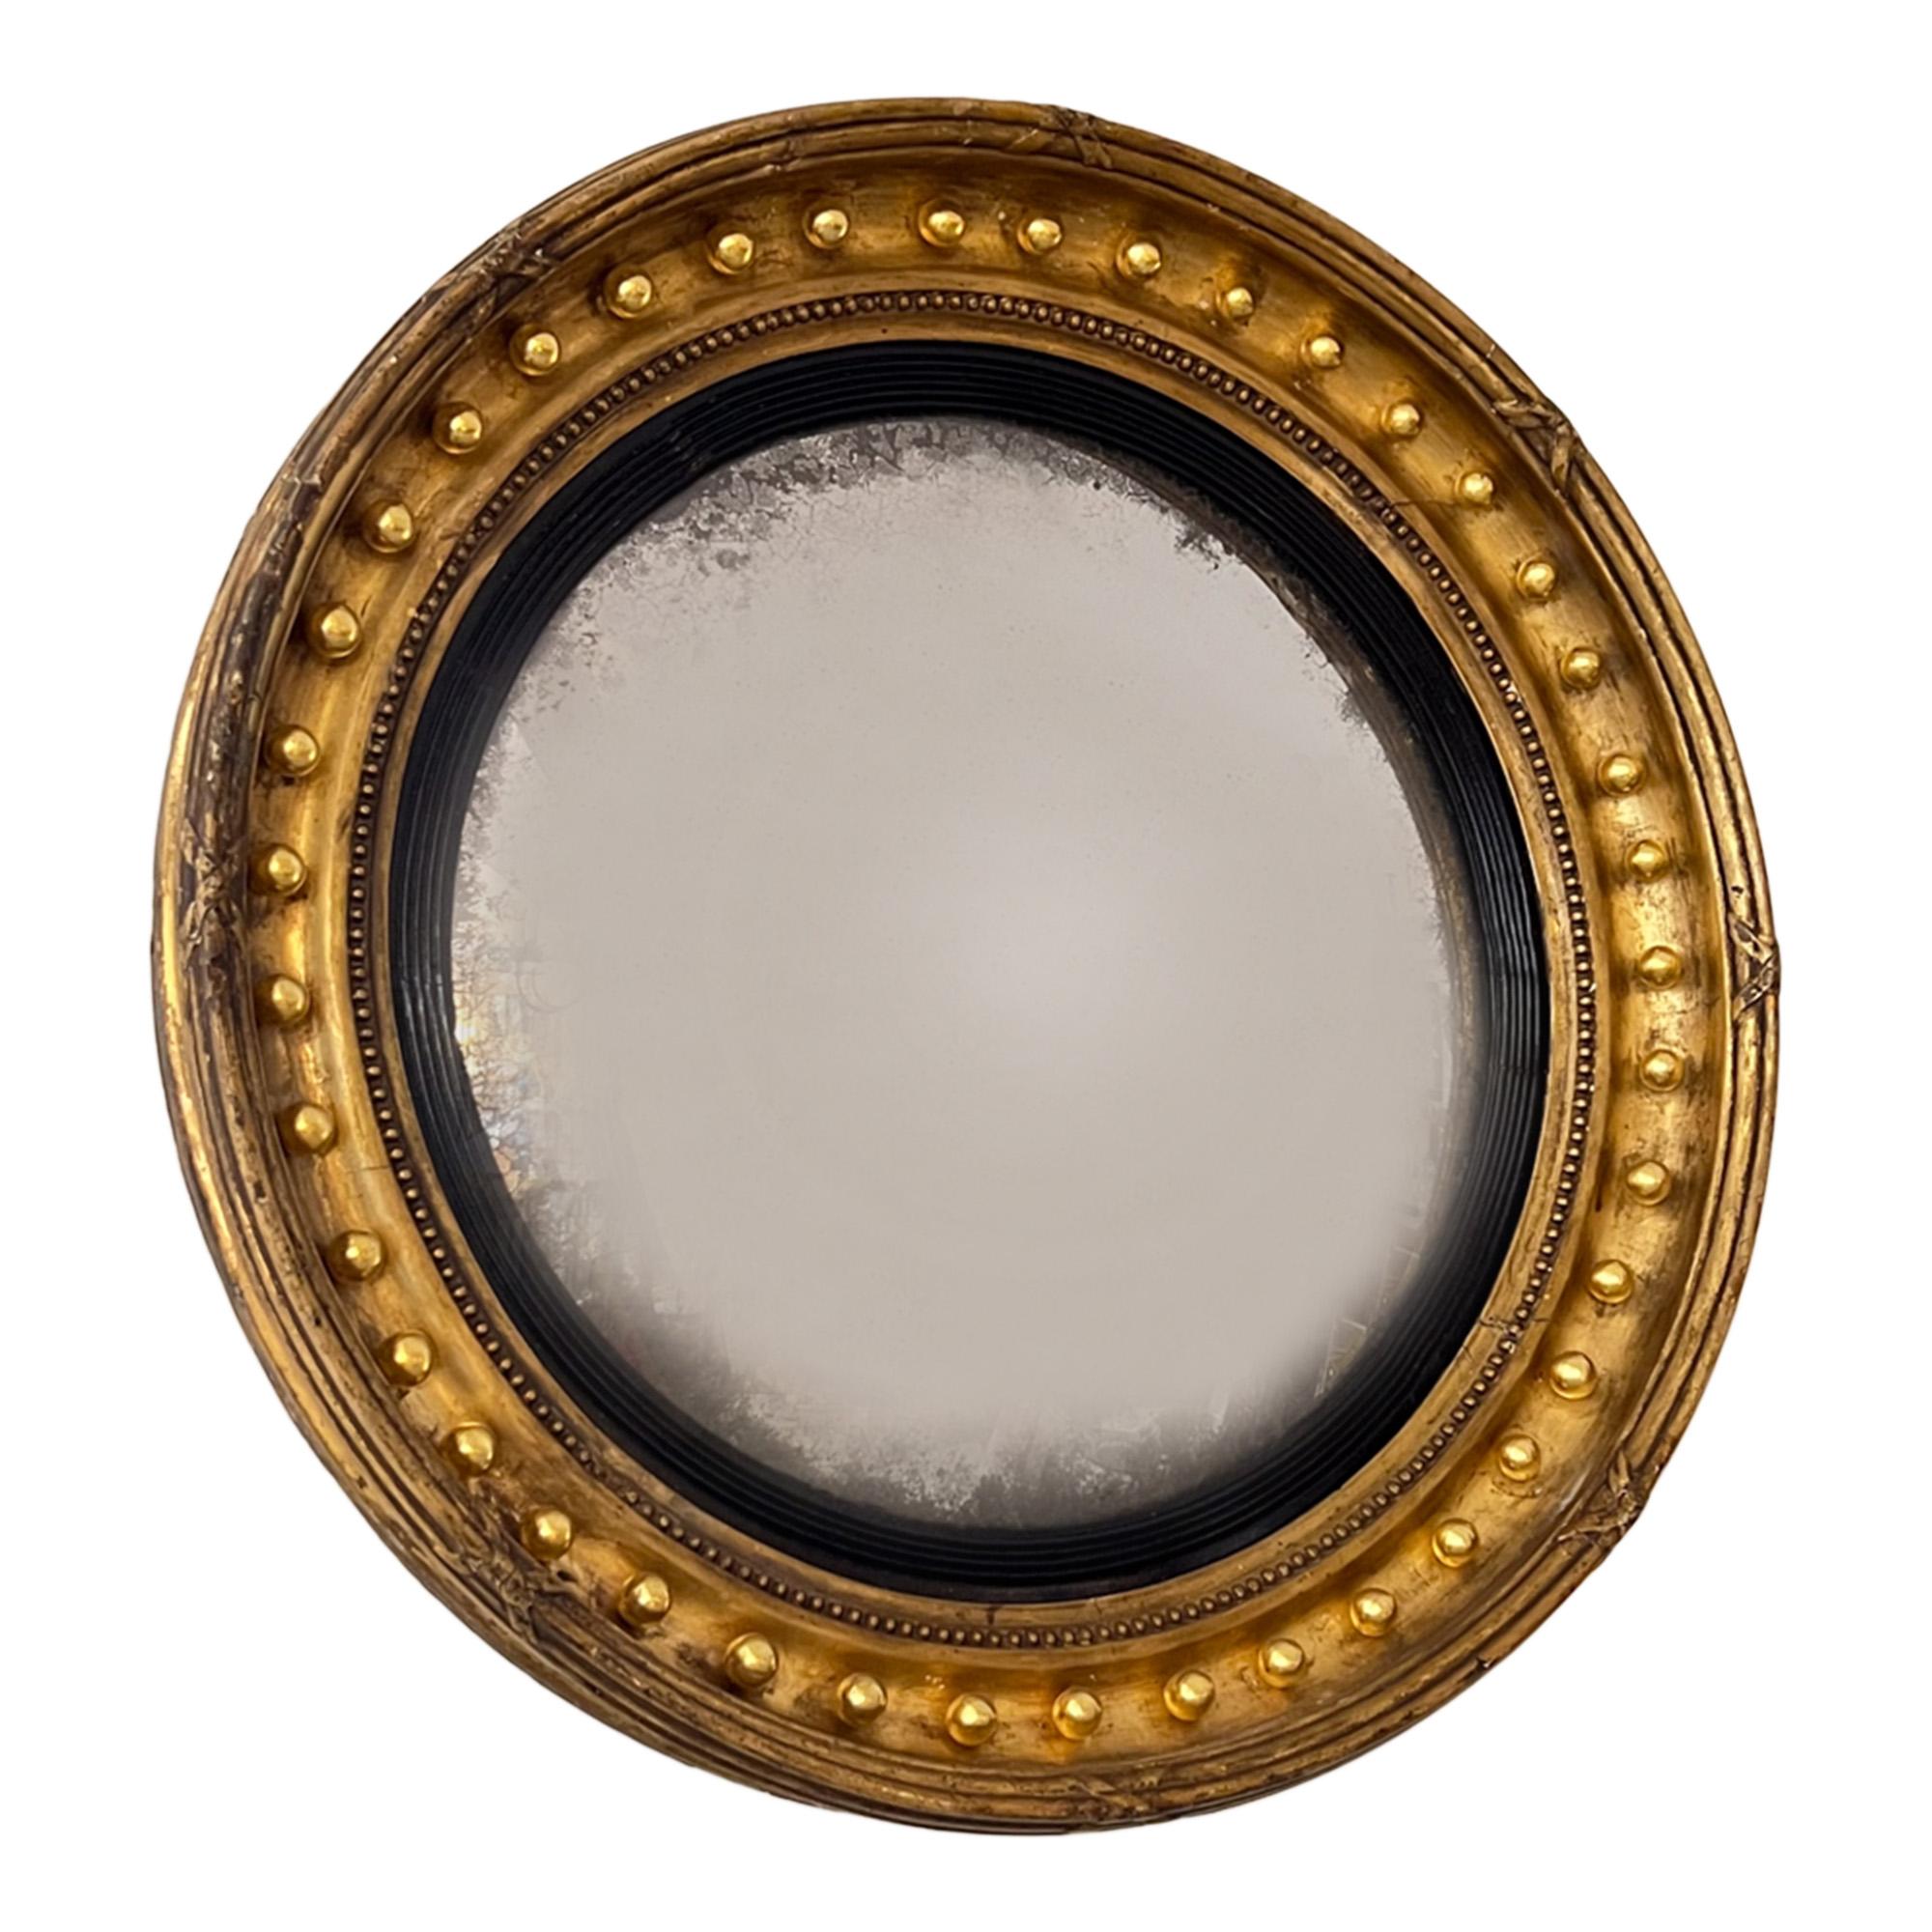 A lovely example of a traditional English Regency convex mirror. 

The giltwood frame is decorated with regularly spaced balls. The original plate is foxed around the edge and again - as is traditional - the mirror is convex. Please take a look at